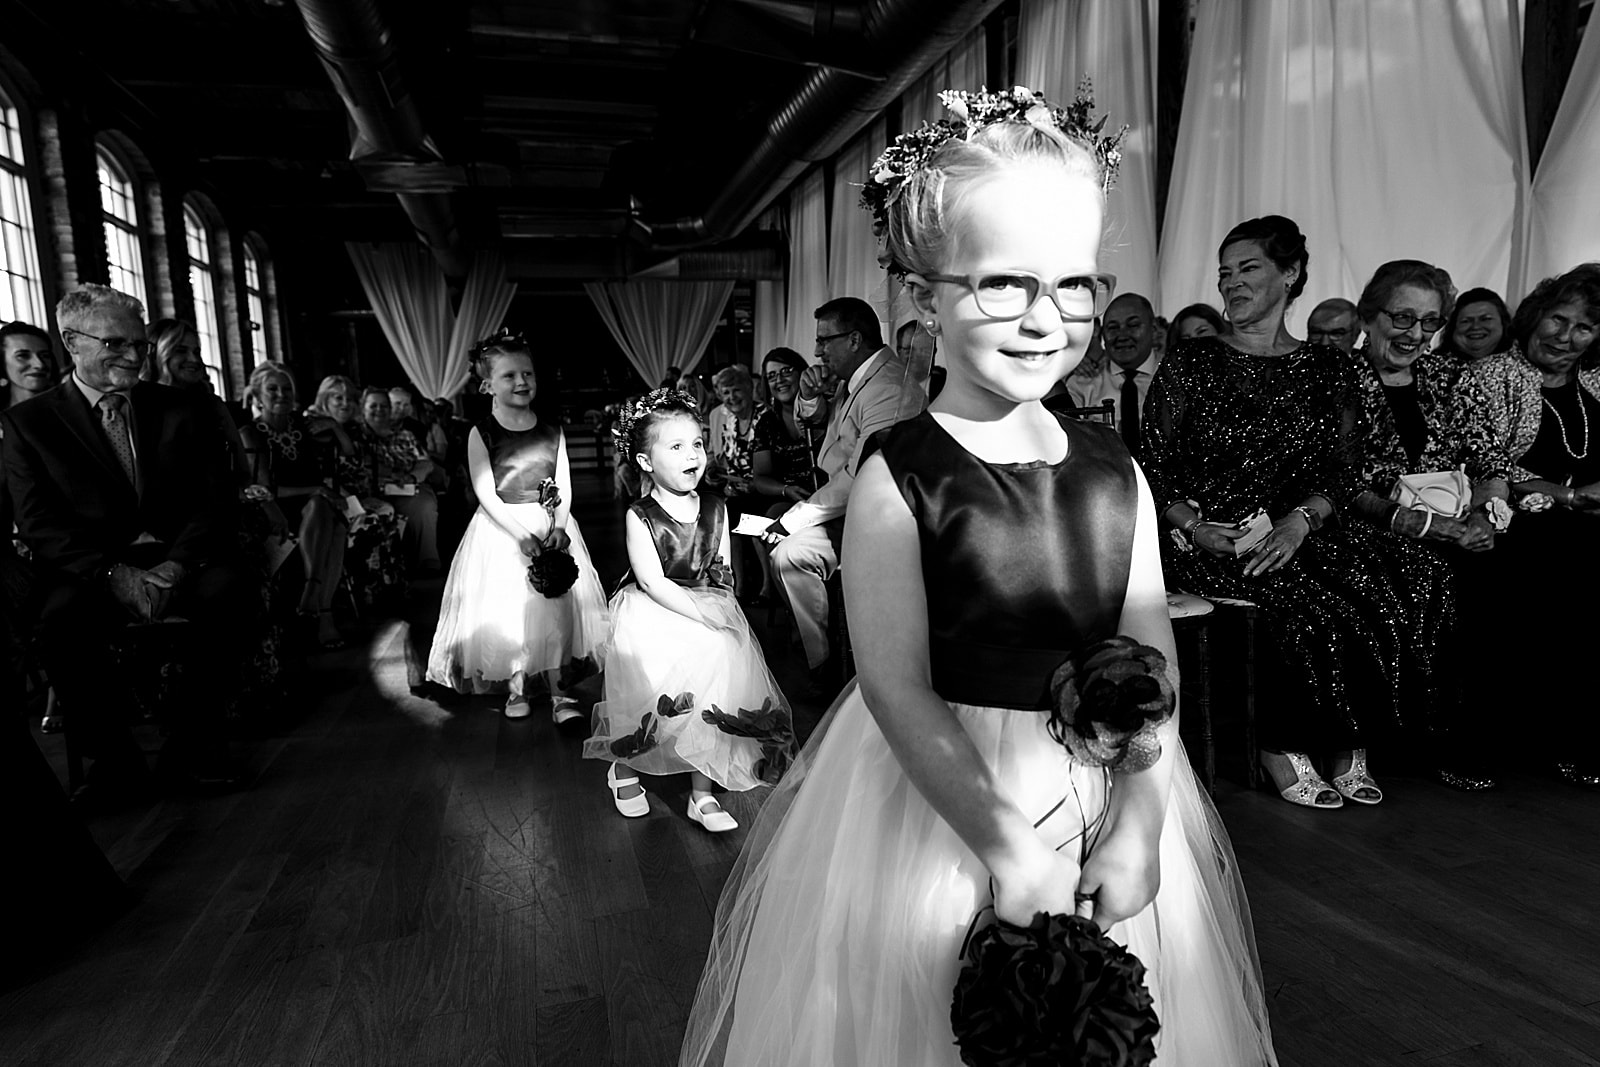 Flower girls process down the aisle